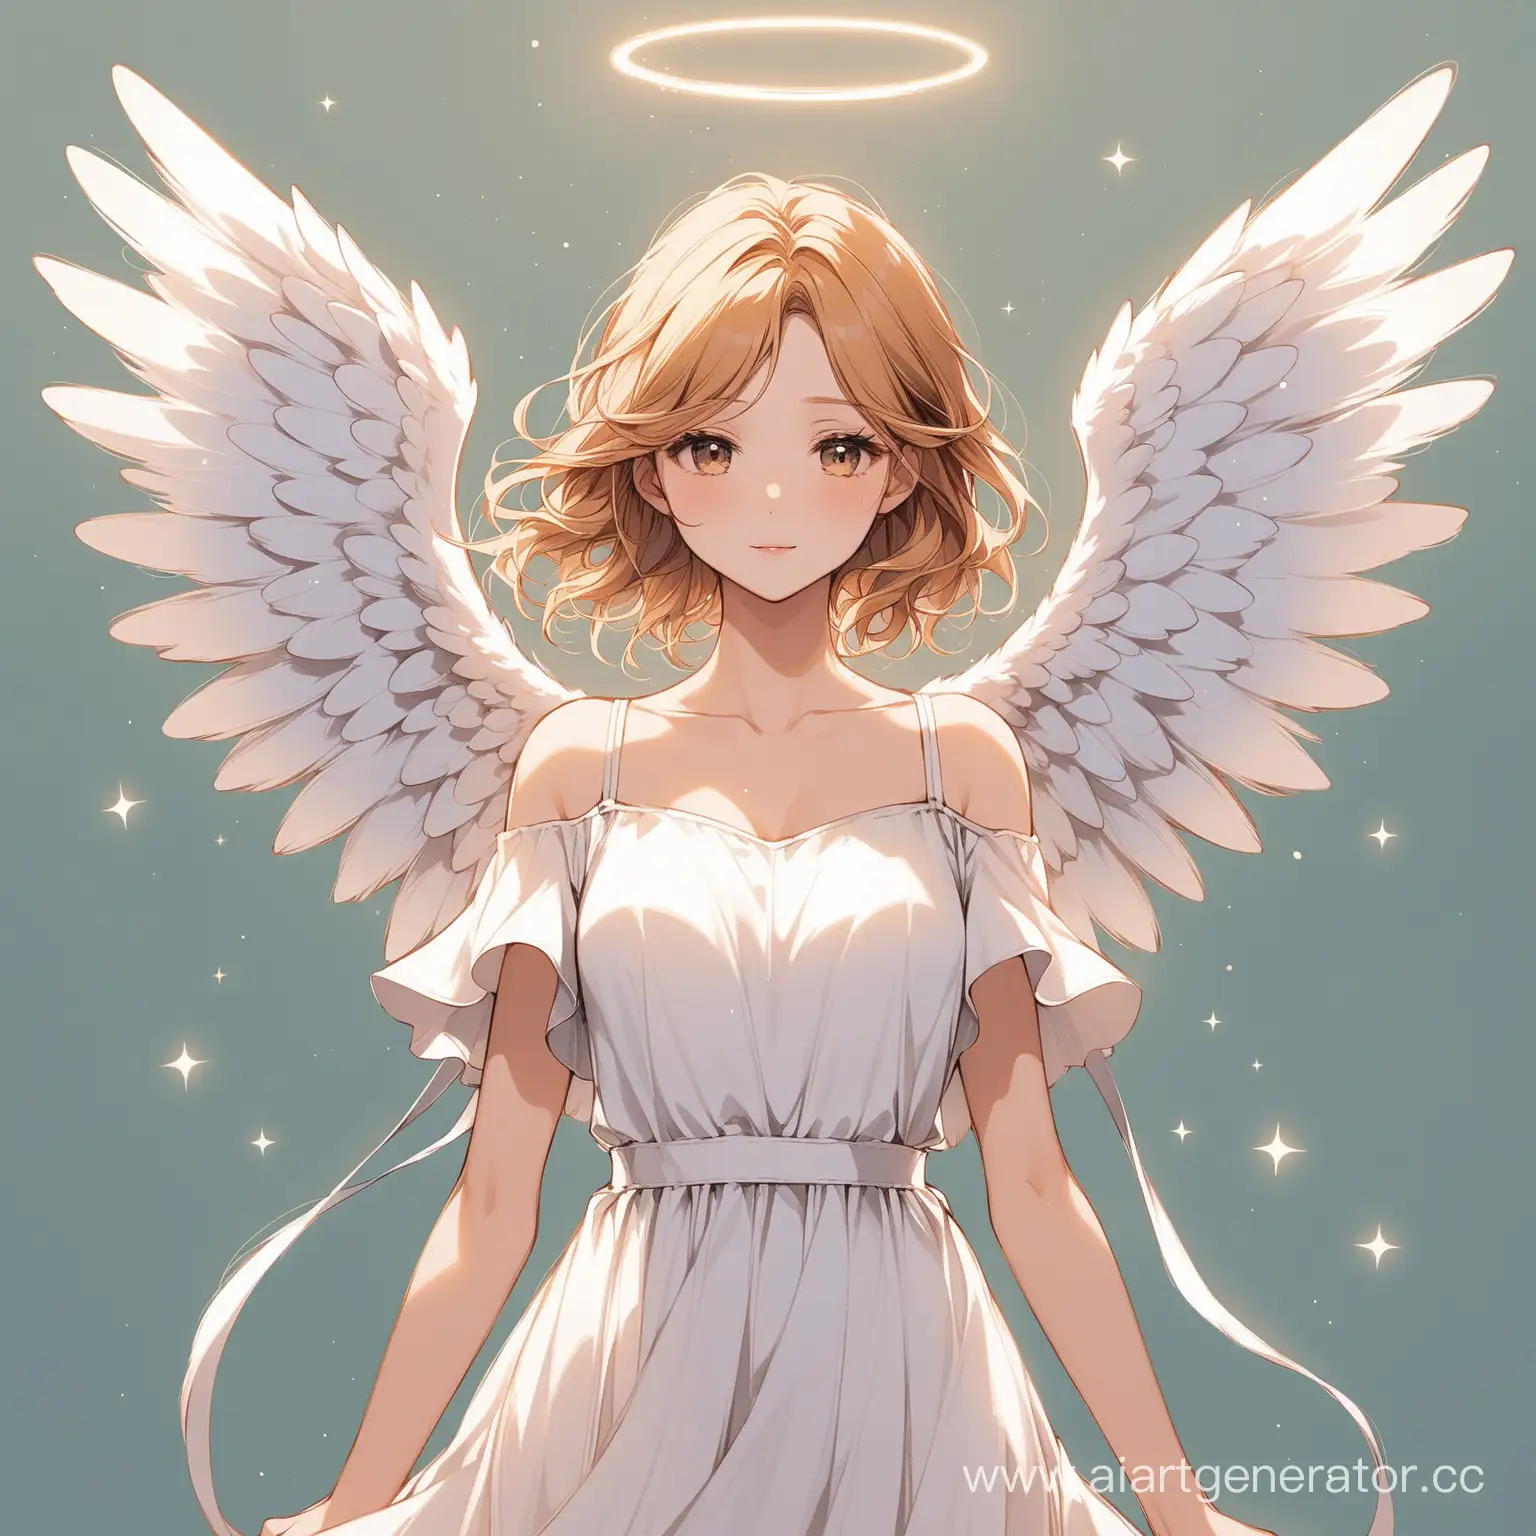 Fallen-Angel-with-Clipped-Wings